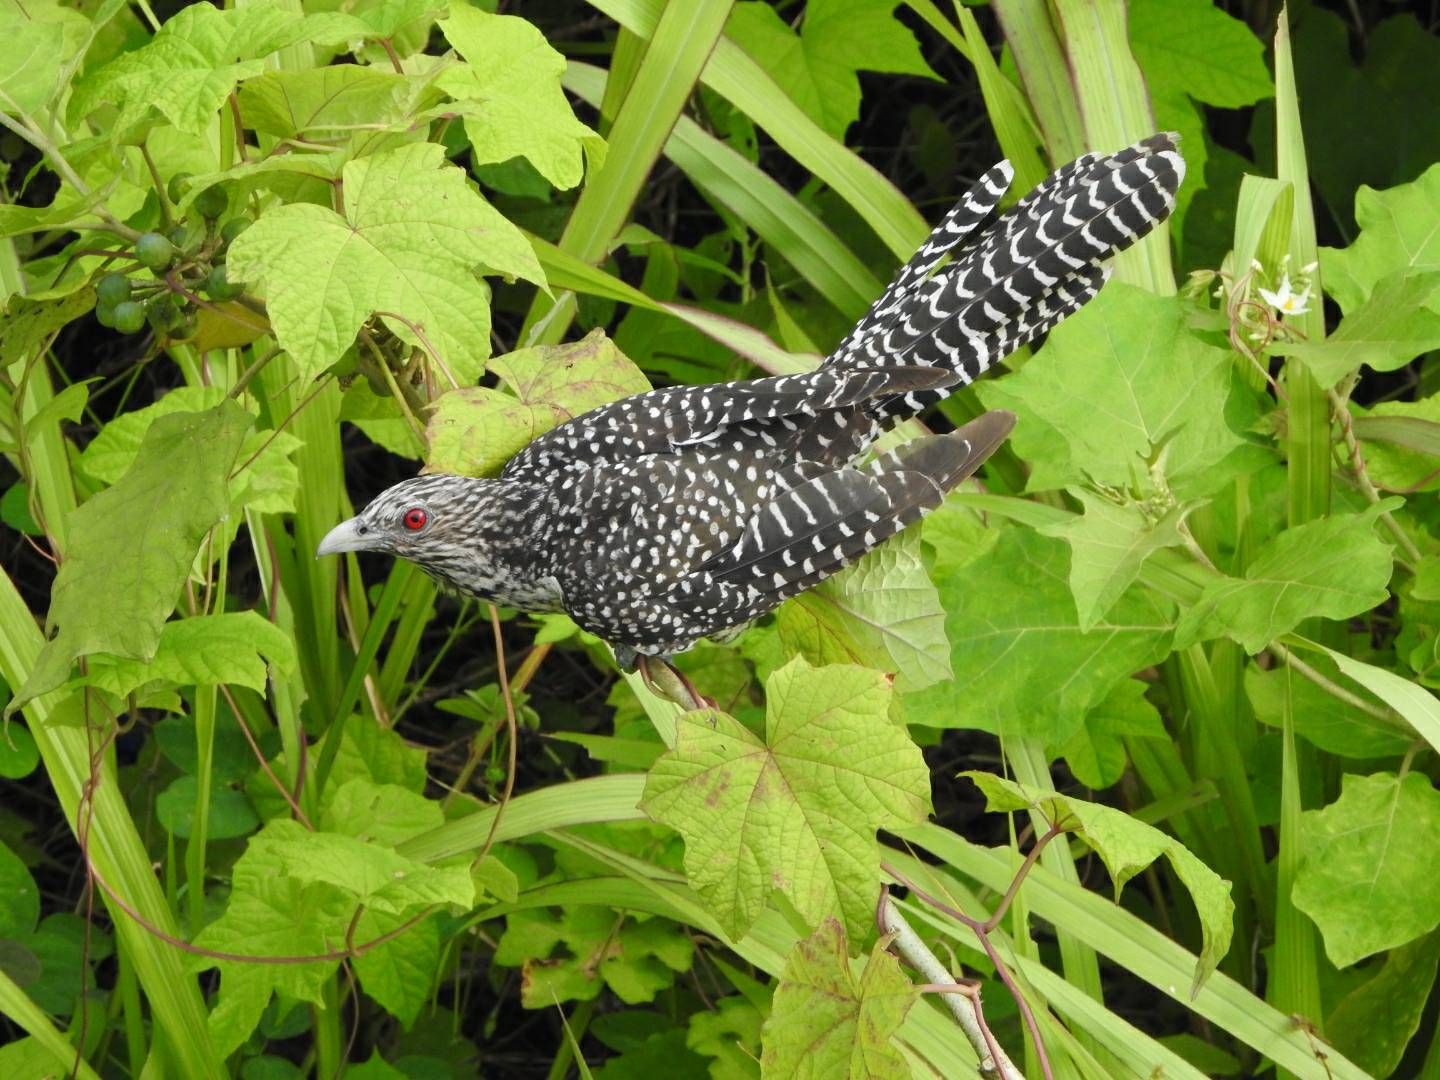 Cuckoo Nature Birds with Red Eyes - Members